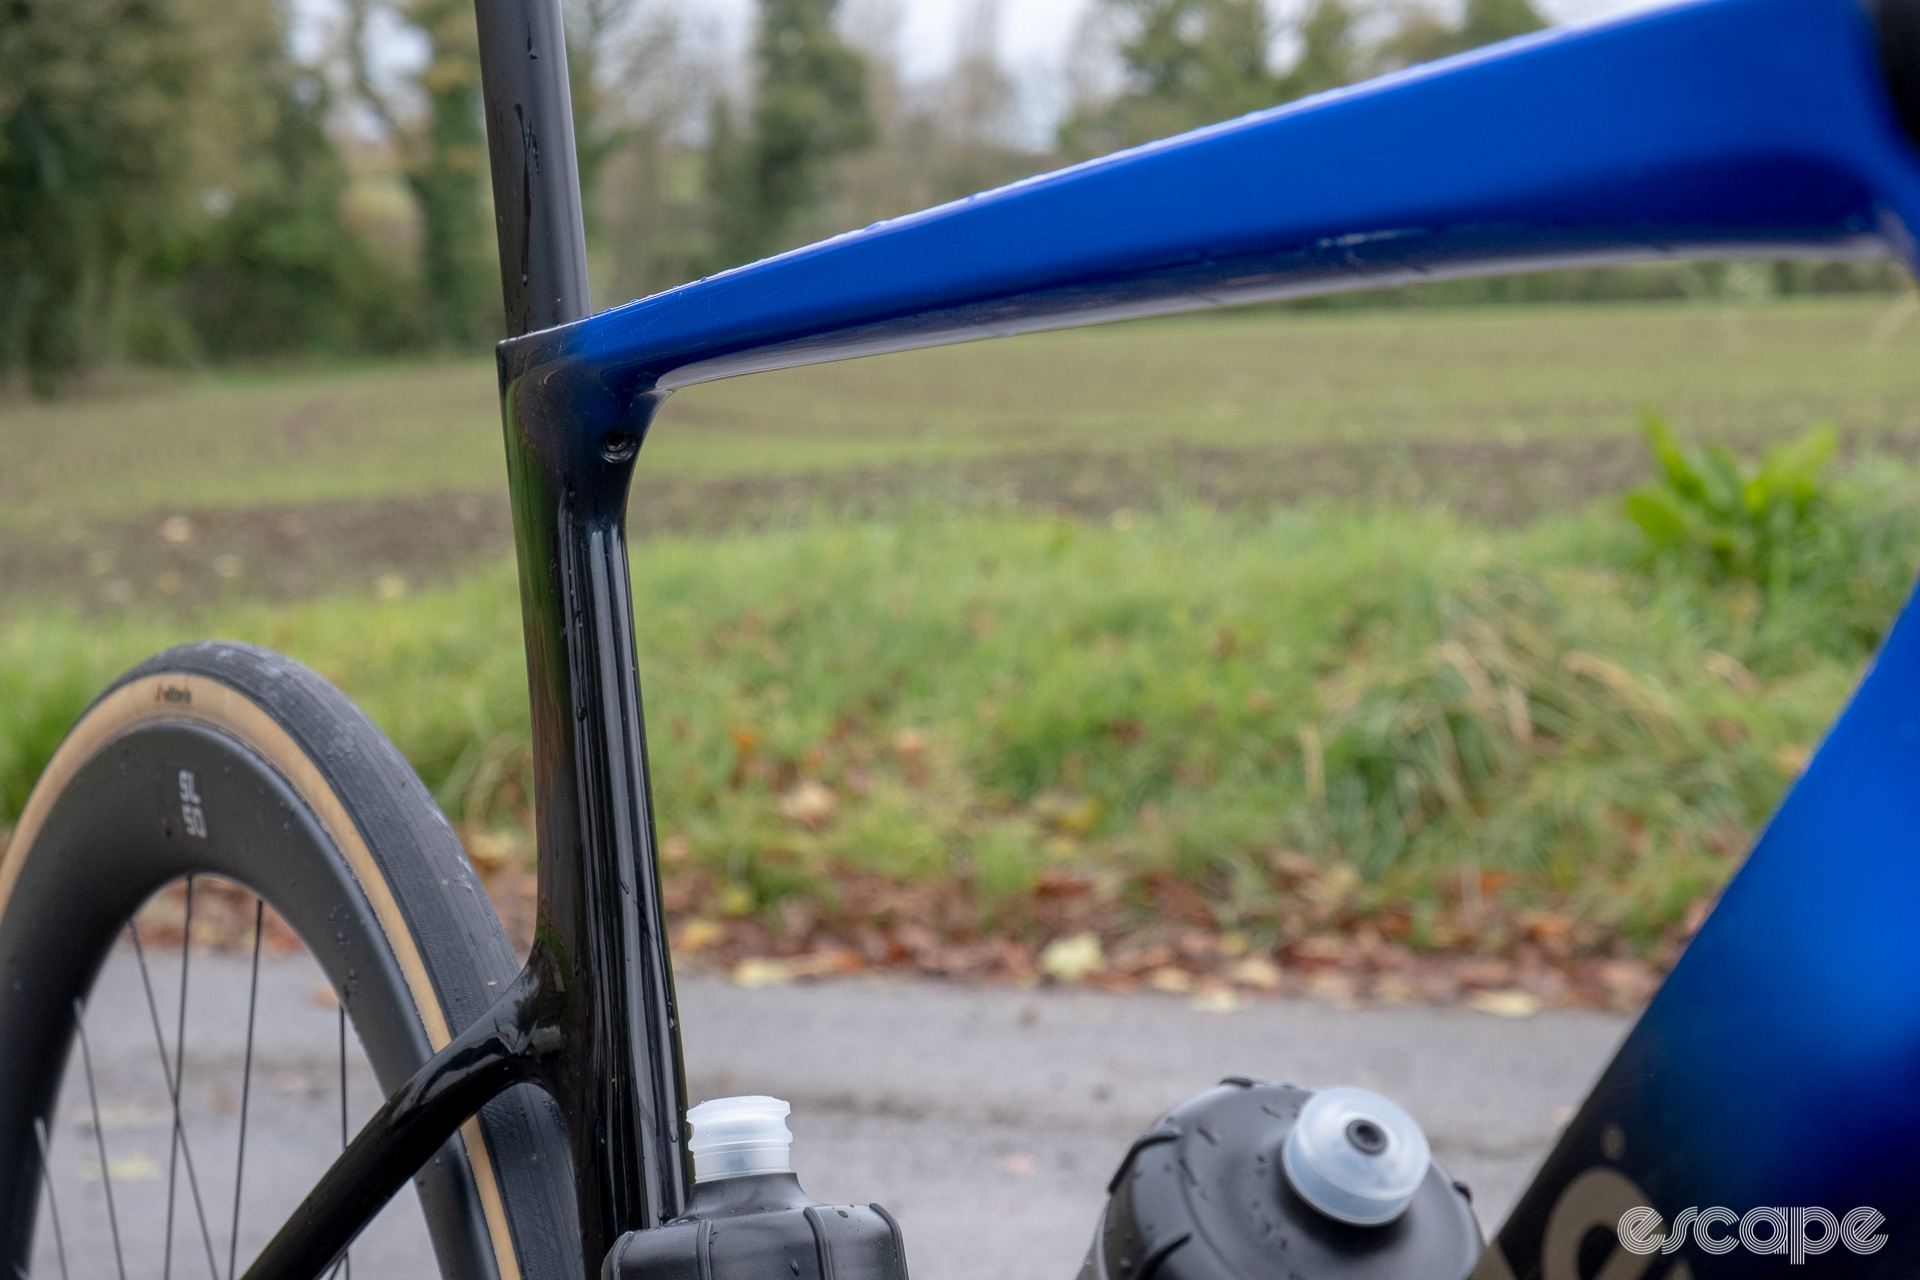 The photo shows the tapering top tube and aero profiled seat tube on a new Cannondale SuperSix Evo Hi-Mod 2 frame with Ultegra Di2 HollowGram and R-SL 50 wheelset pictured along a country lane with a ploughed and seeded field in the background.